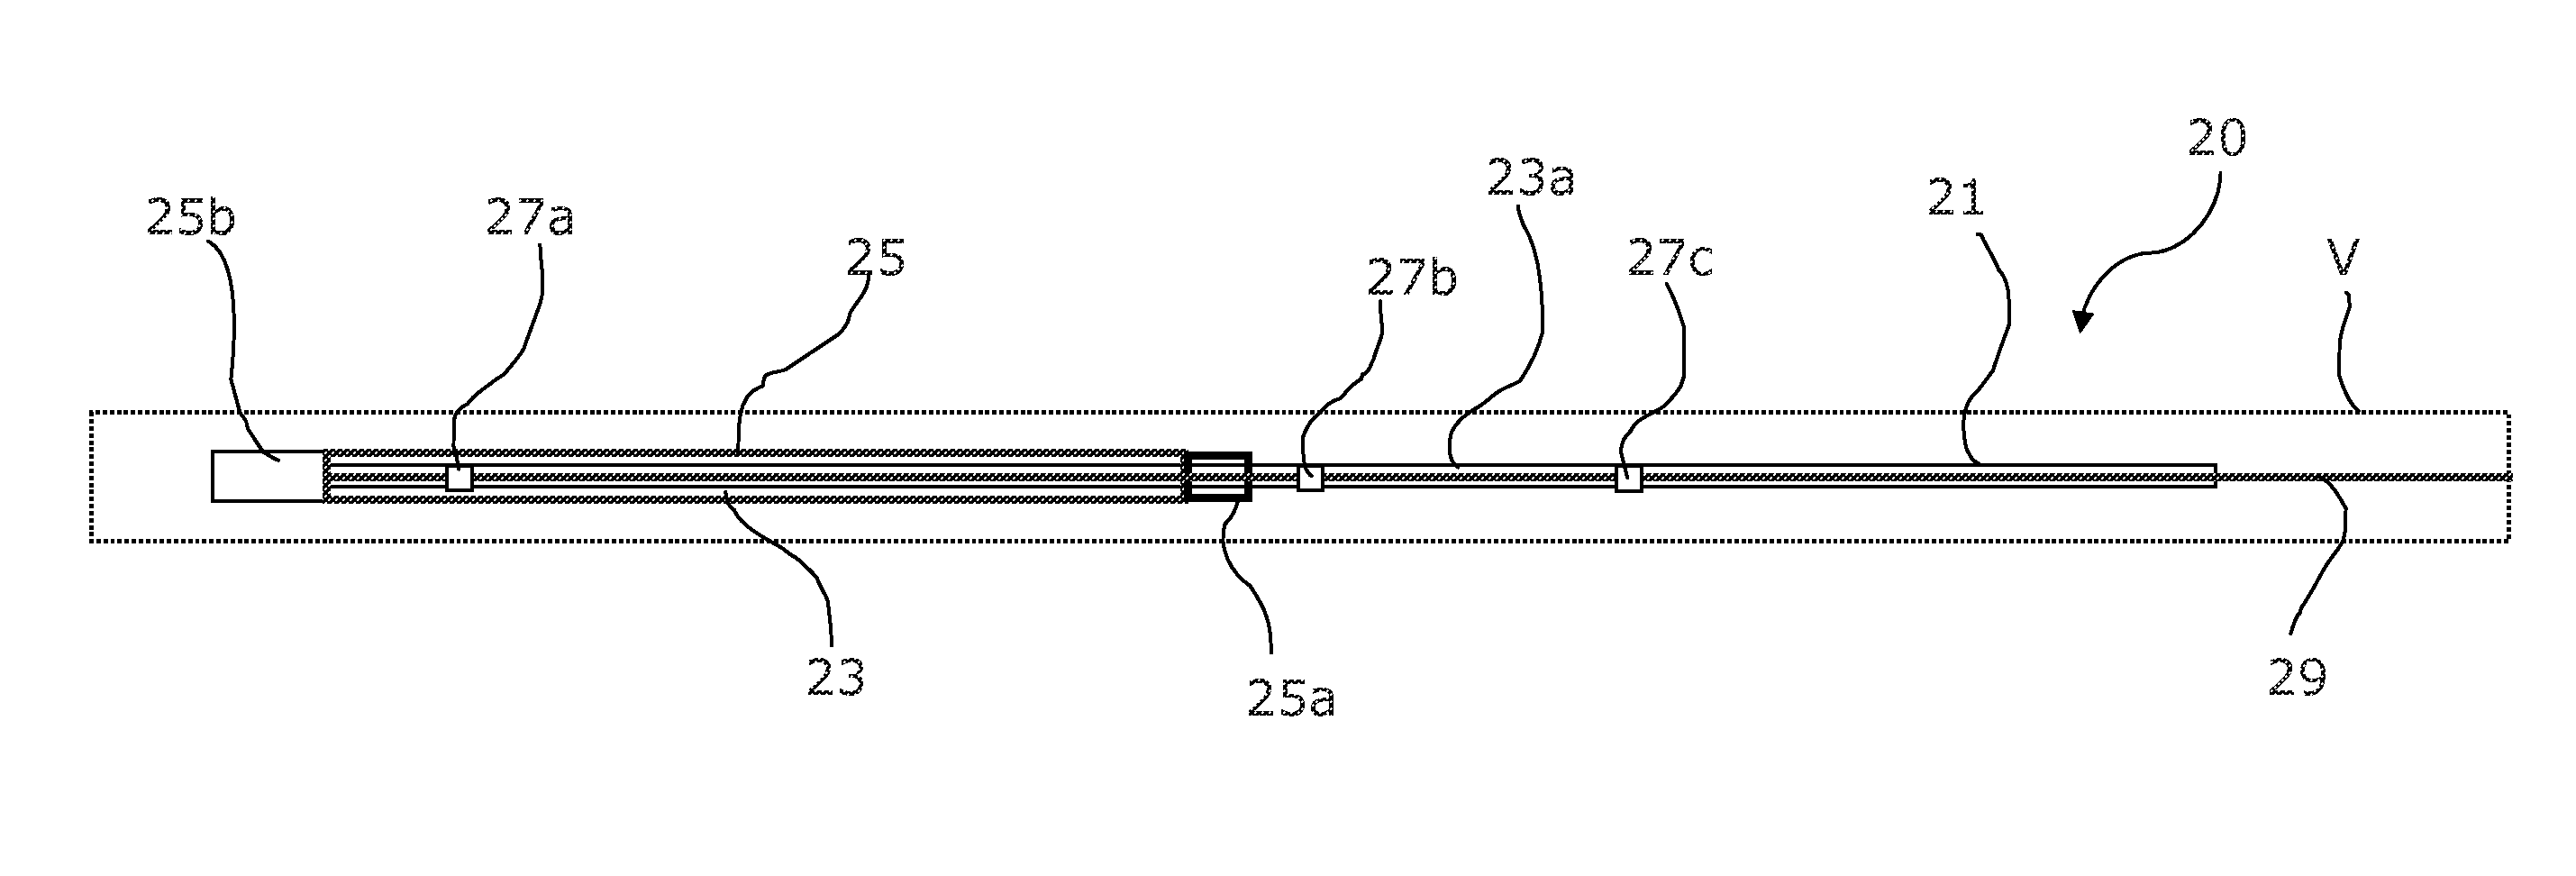 Balloon catheter with uncoated balloon portion or second uncoated balloon